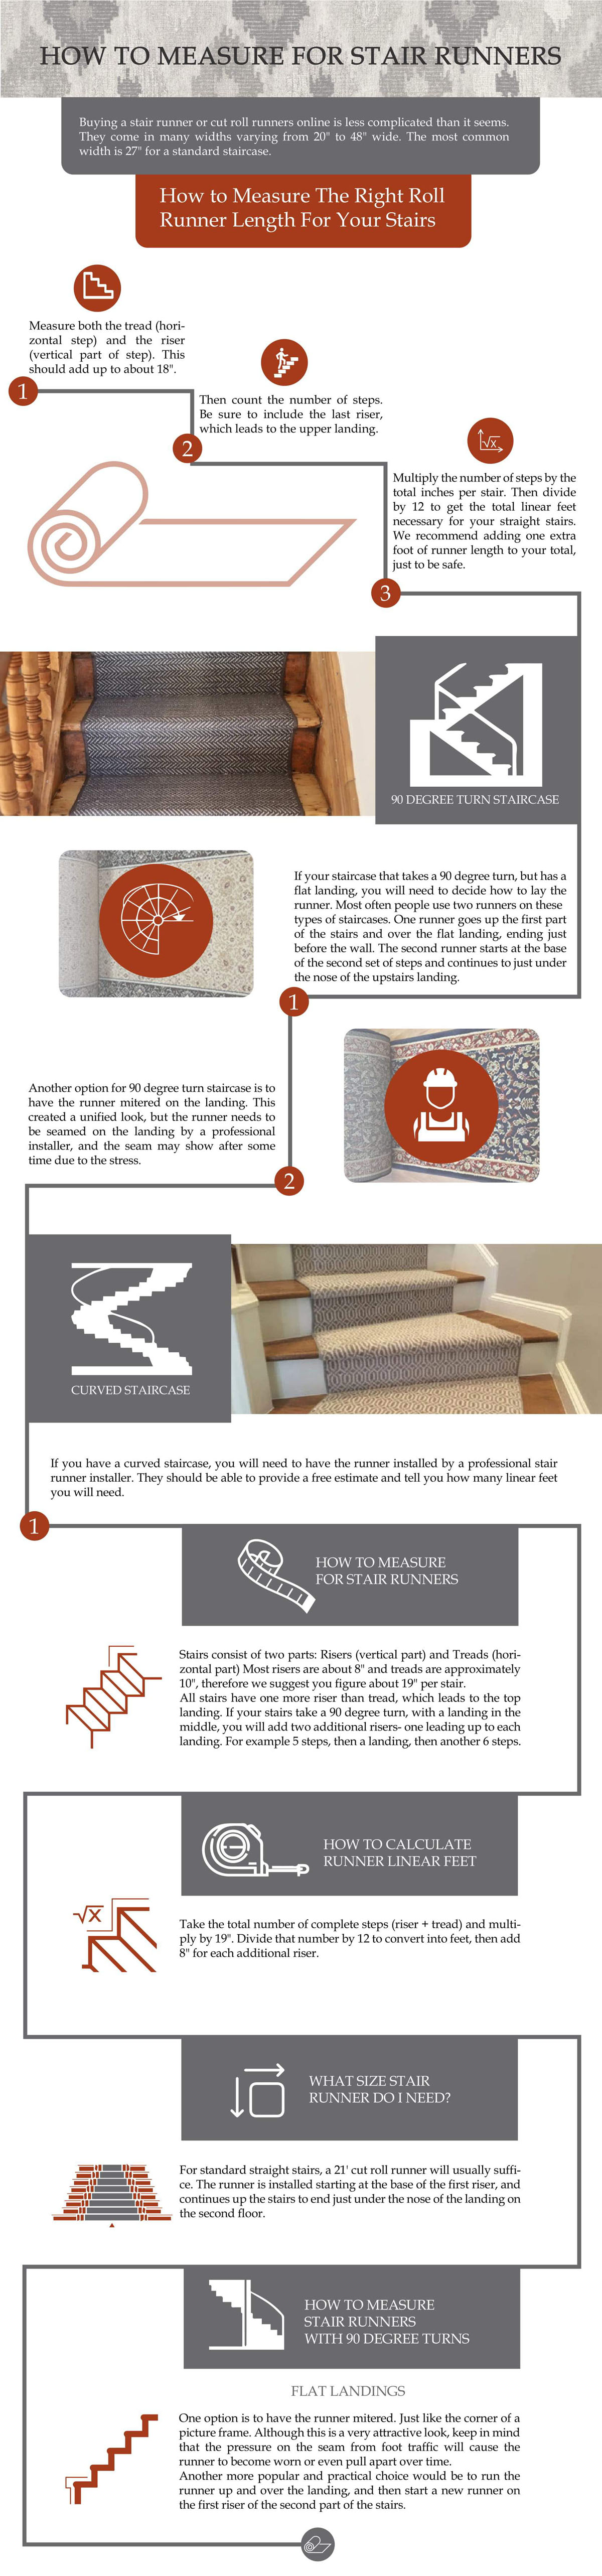 How To Measure for Stair Runners